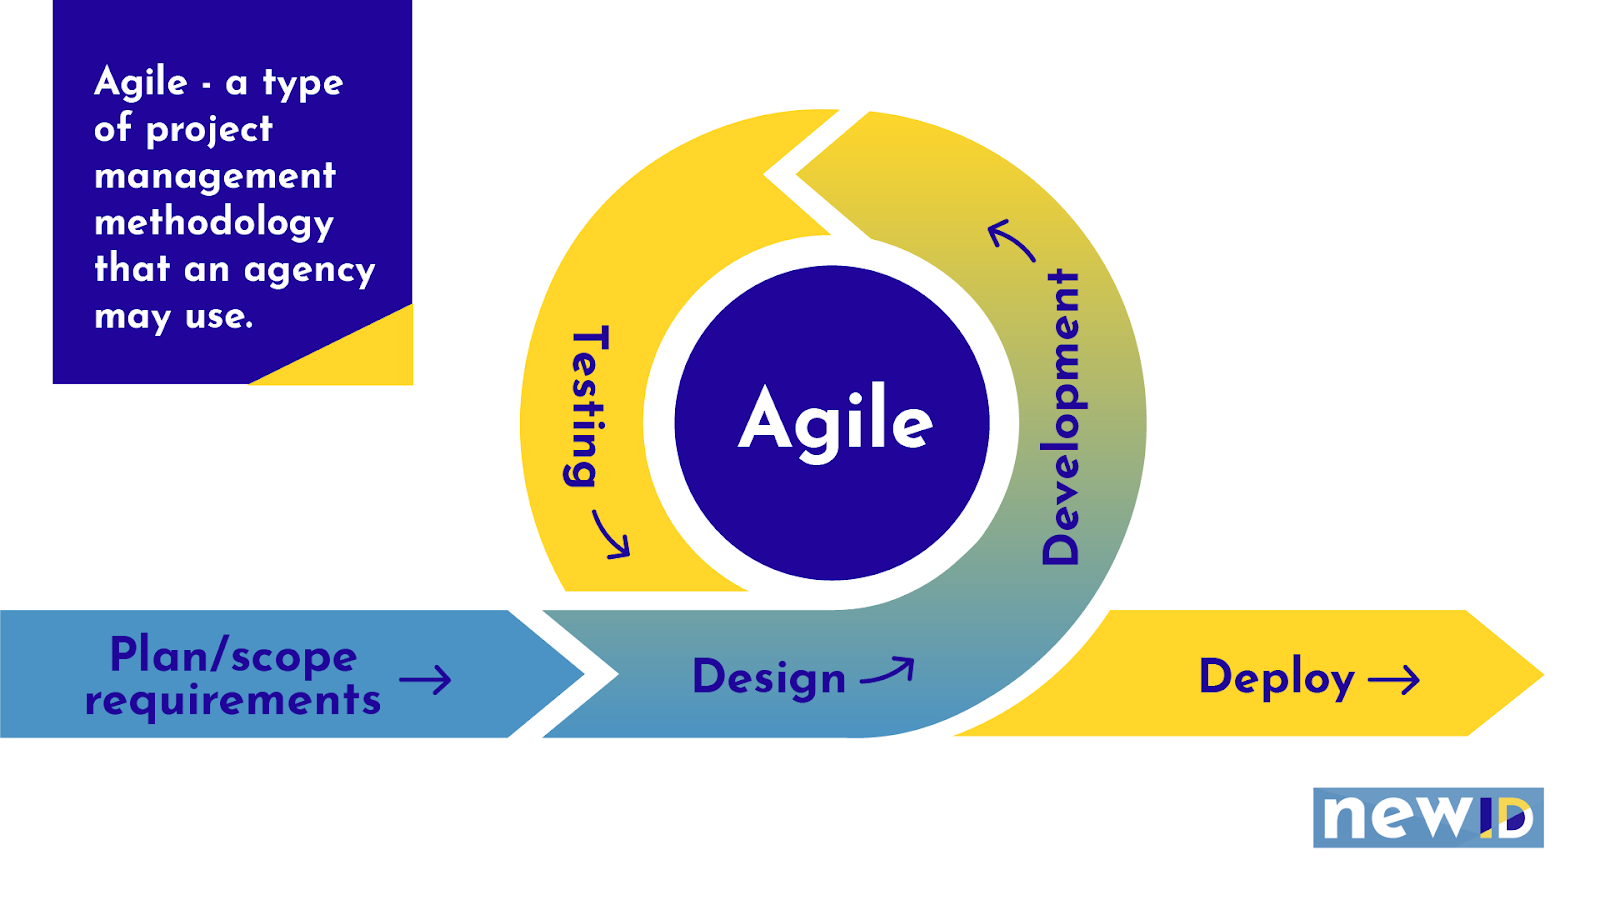 A diagram explaining the project management methodology Agile that an agency may use. The 5 steps of agile are 1: plan/scope requirements, 2. design, 3. development, 4. testing, 5. deploy.